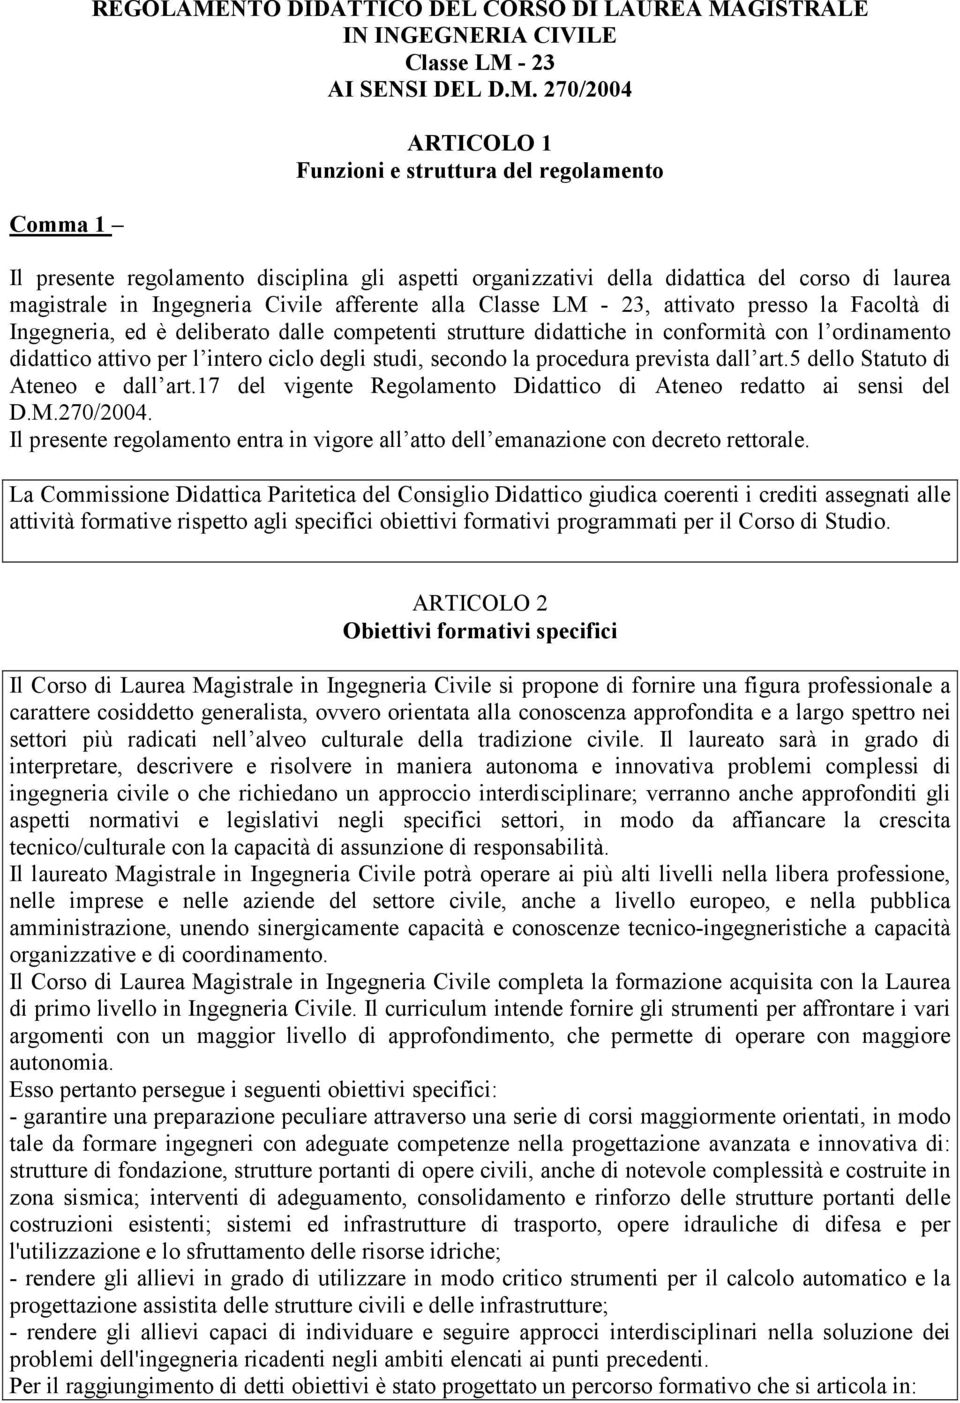 GISTRALE IN INGEGNERIA CIVILE Classe LM 